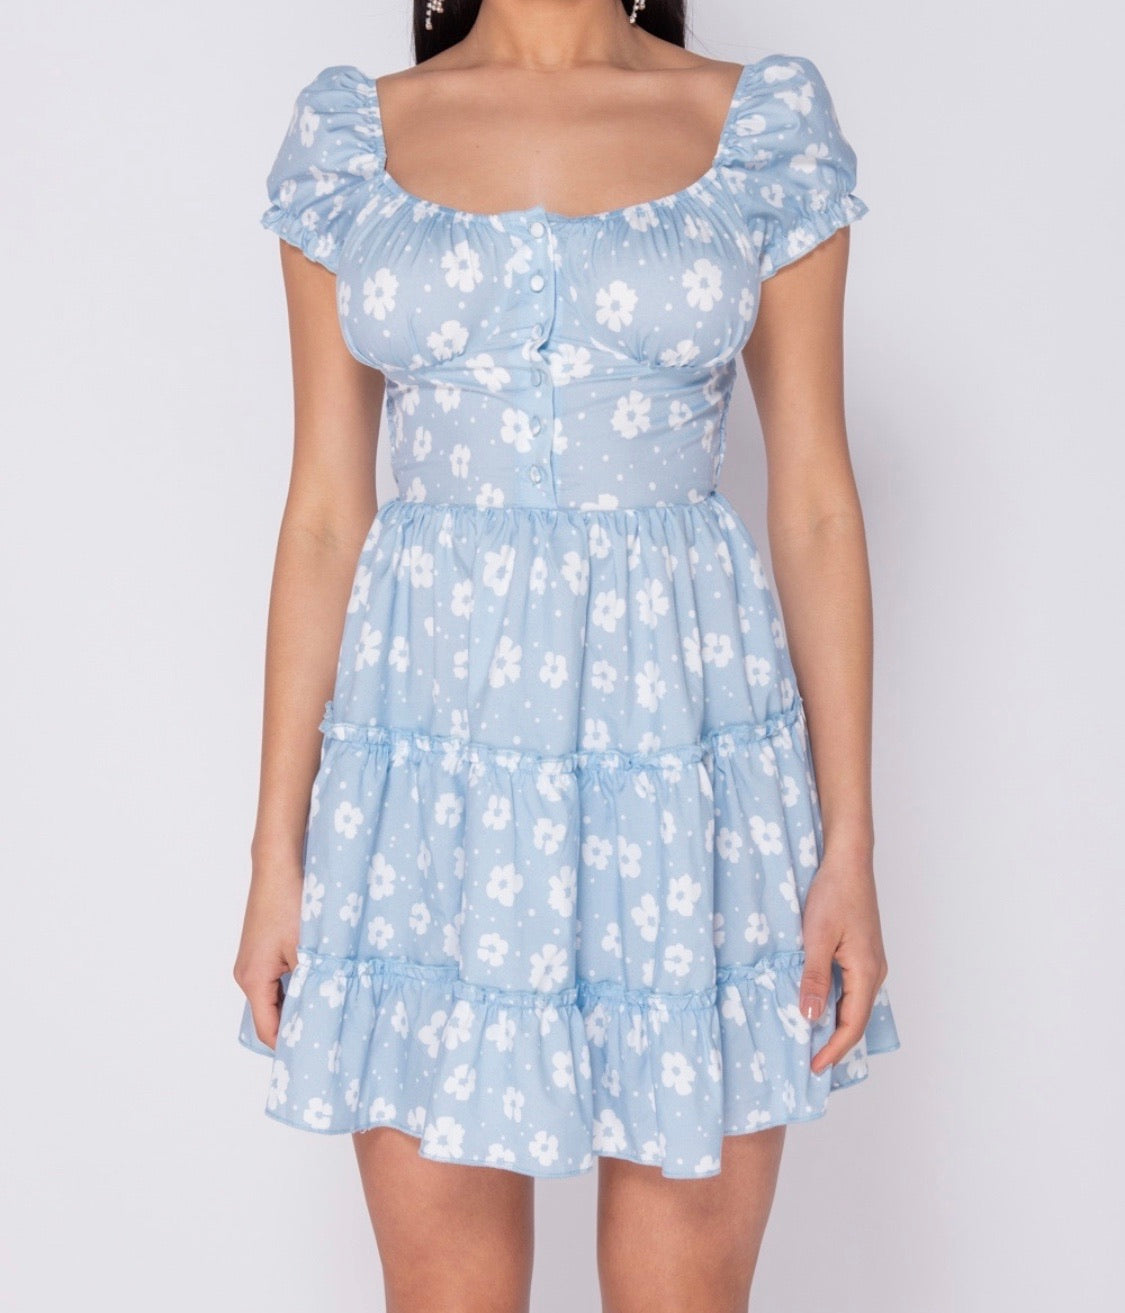 Home [From Sweden] Daisy Floral Frill Mini Dress